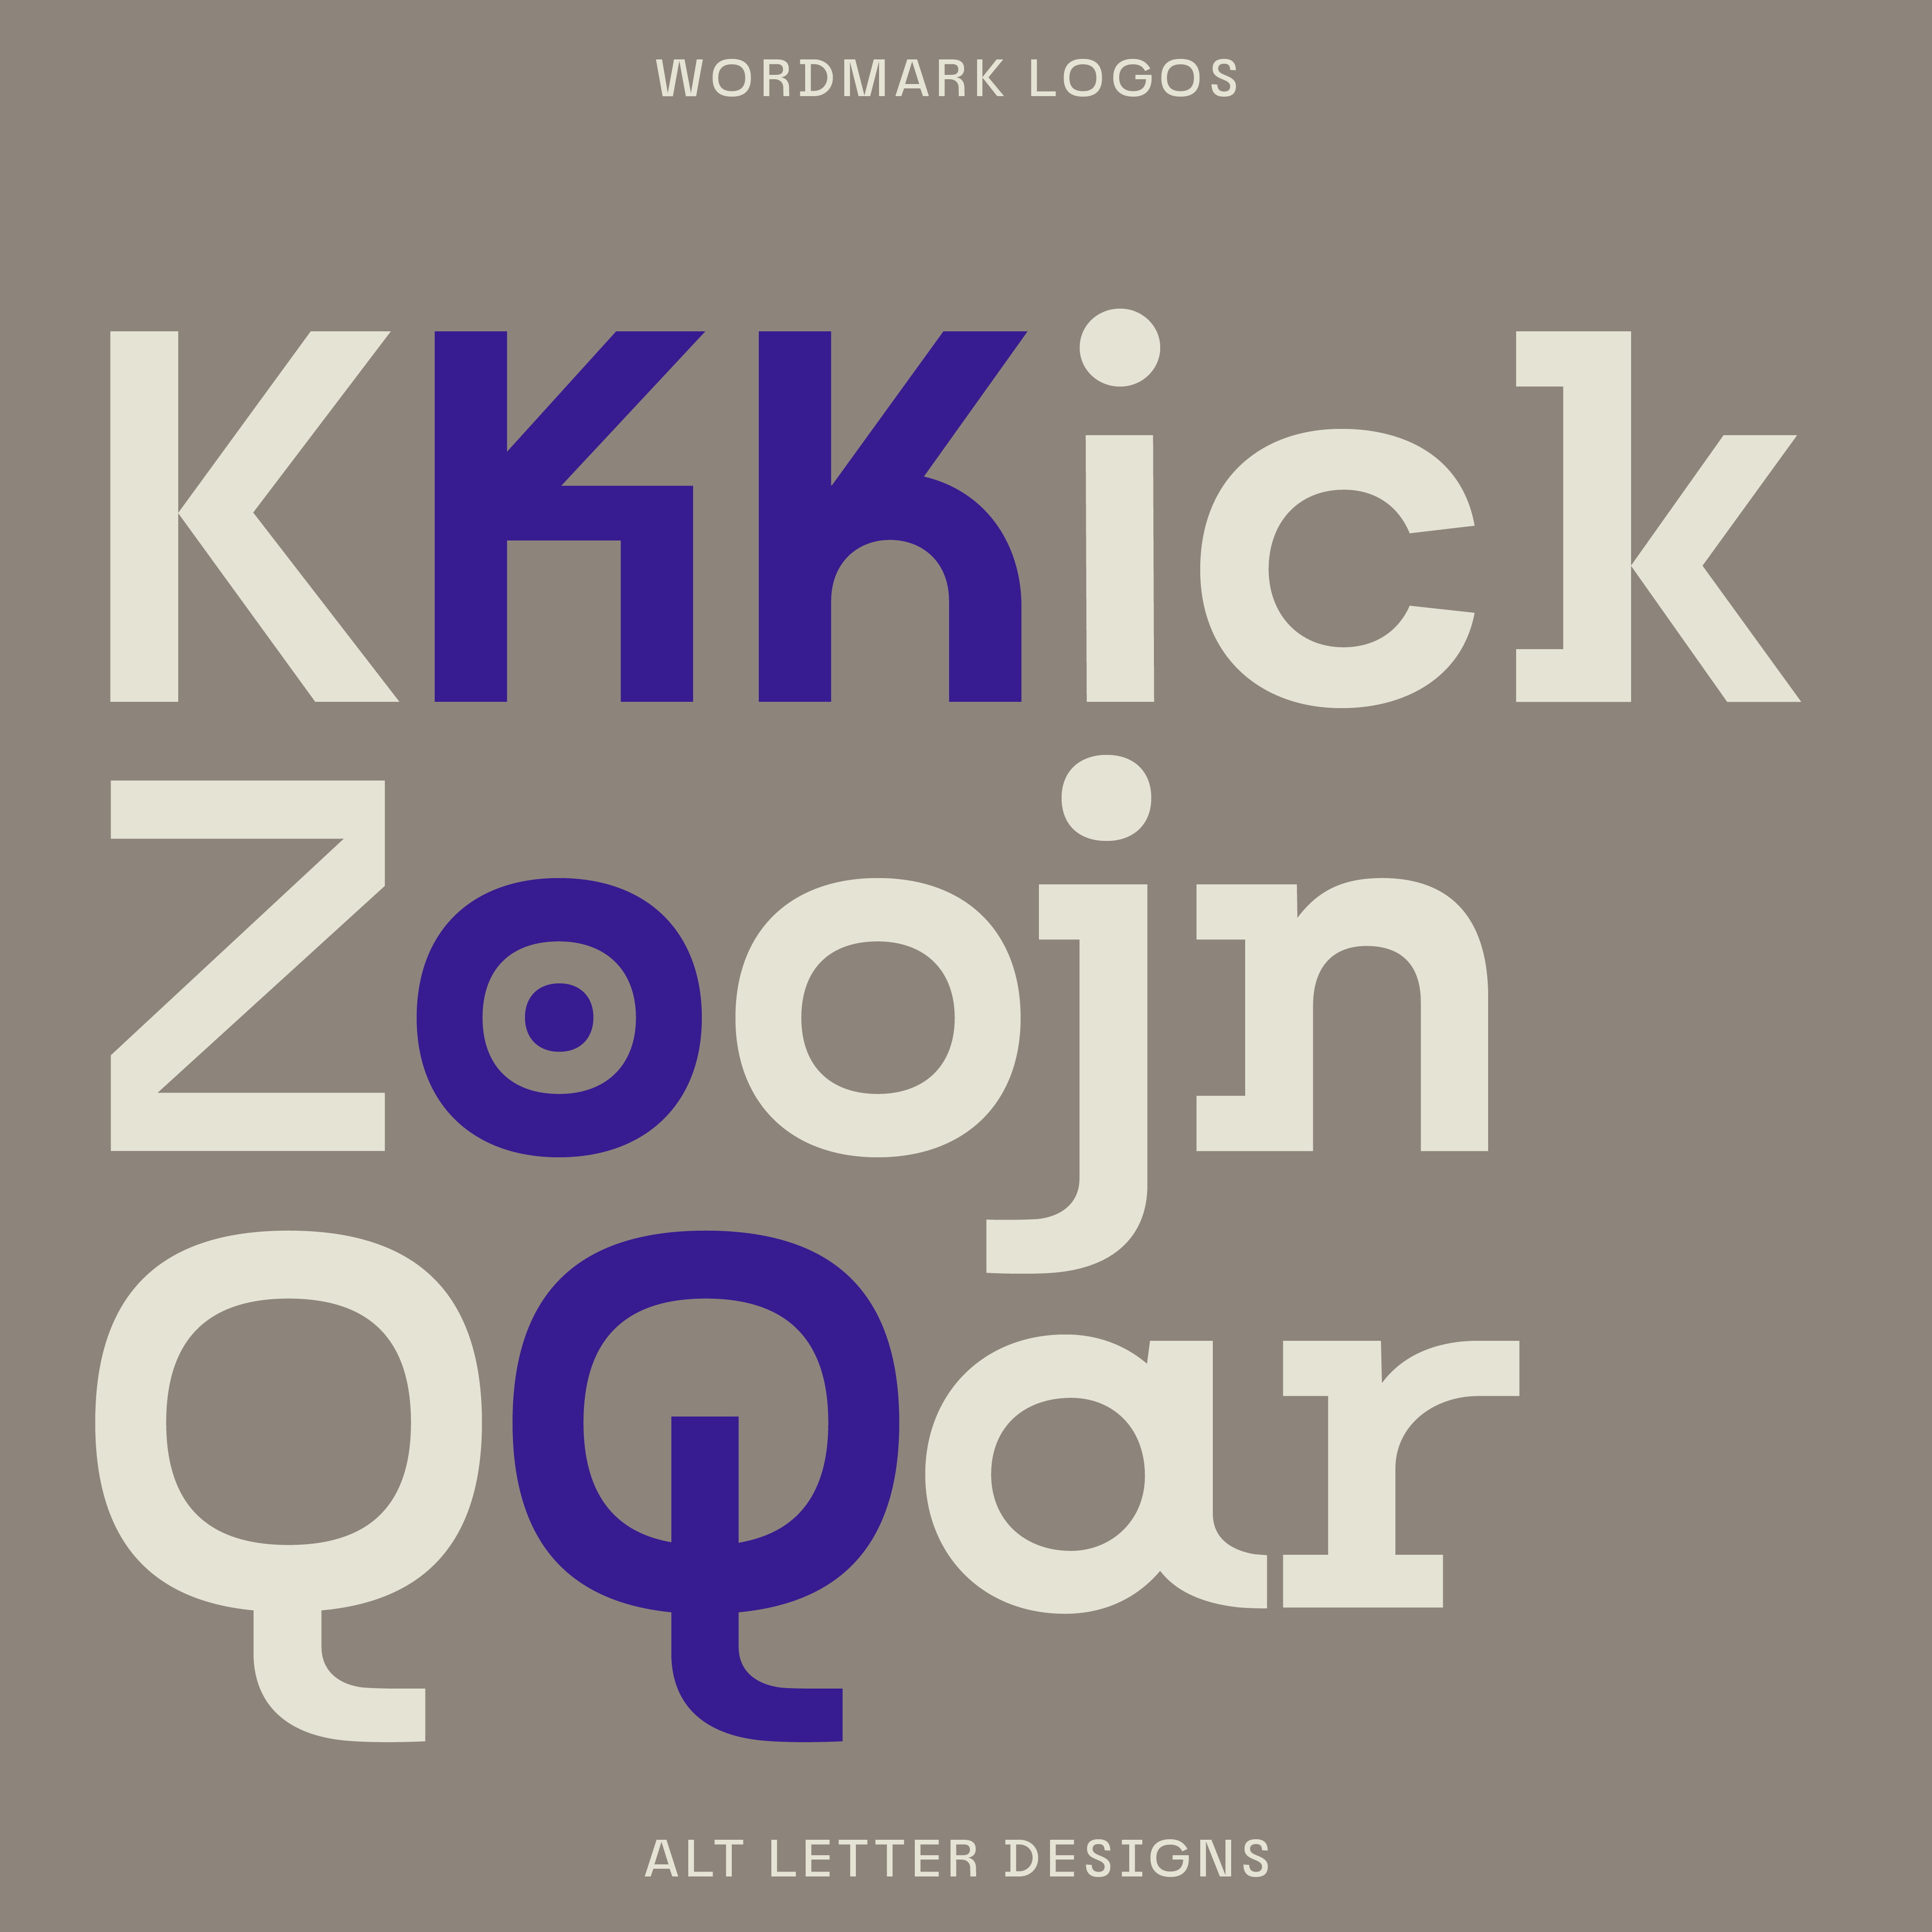 Nano font for wordmark logos with alt letters